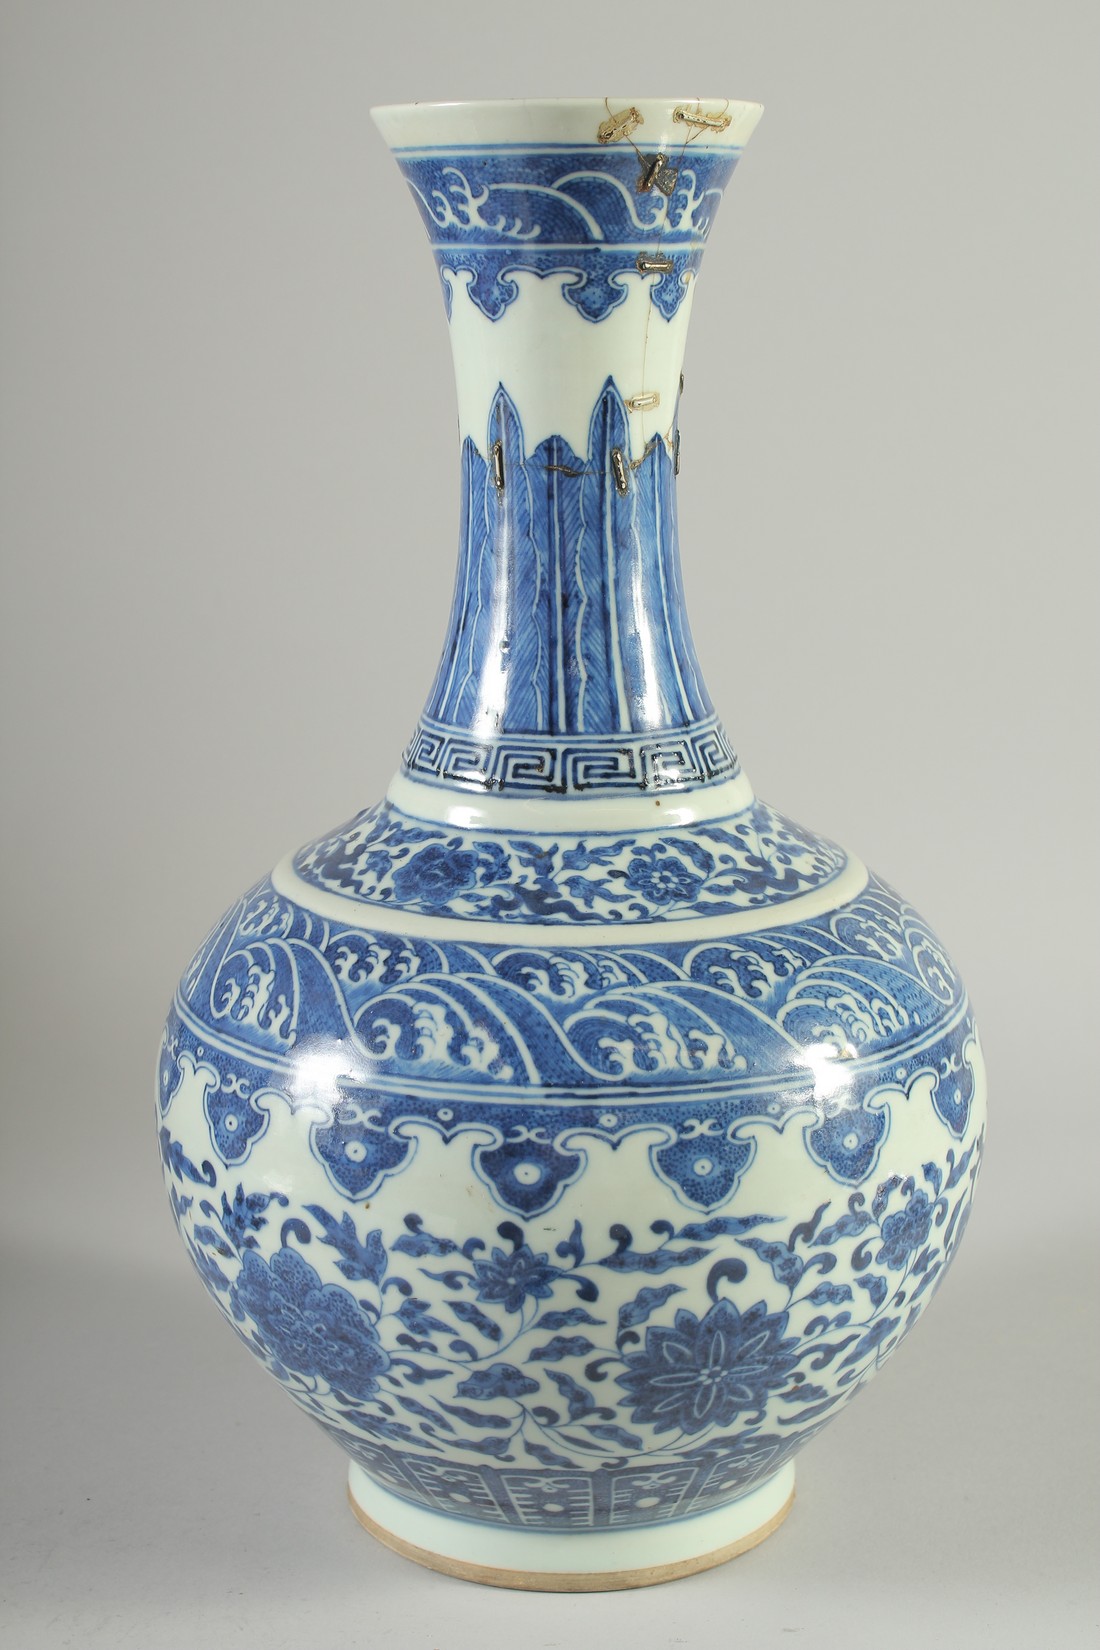 A LARGE 19TH CENTURY CHINESE BLUE AND WHITE PORCELAIN VASE, painted with bands of floral motifs with - Image 3 of 7